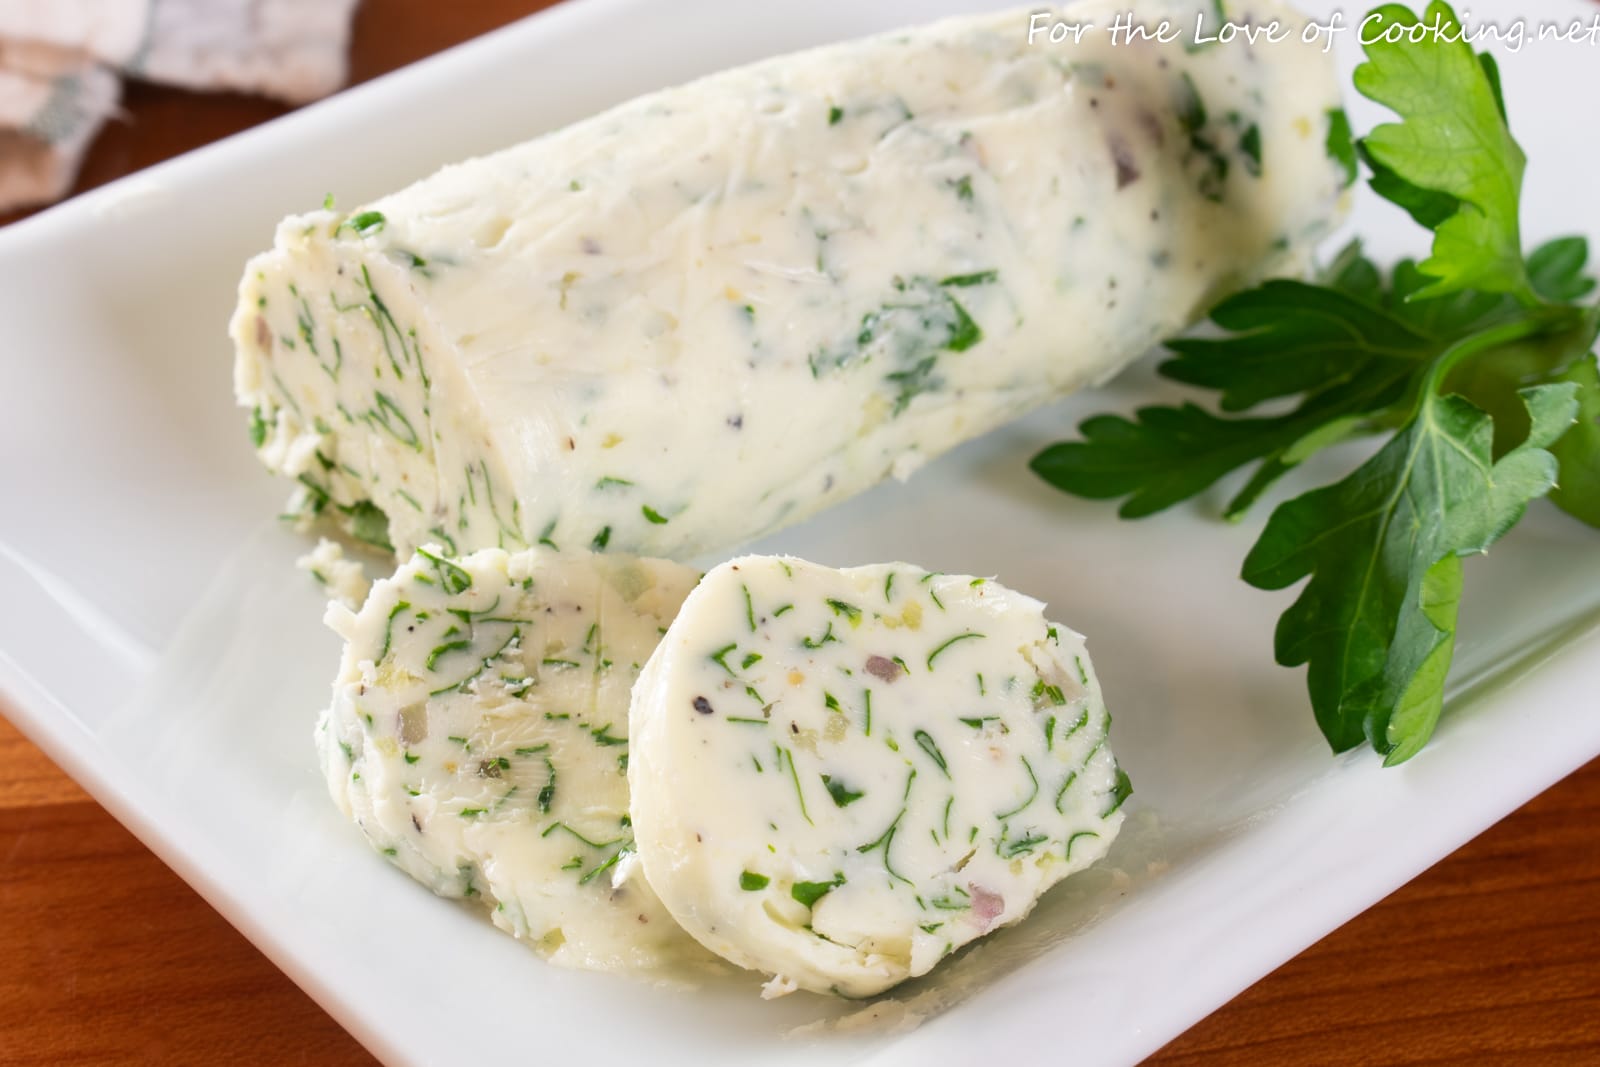 https://fortheloveofcooking-net.exactdn.com/wp-content/uploads/2019/01/Garlic-Herb-Compound-Butter-4.jpg?strip=all&lossy=1&quality=90&ssl=1